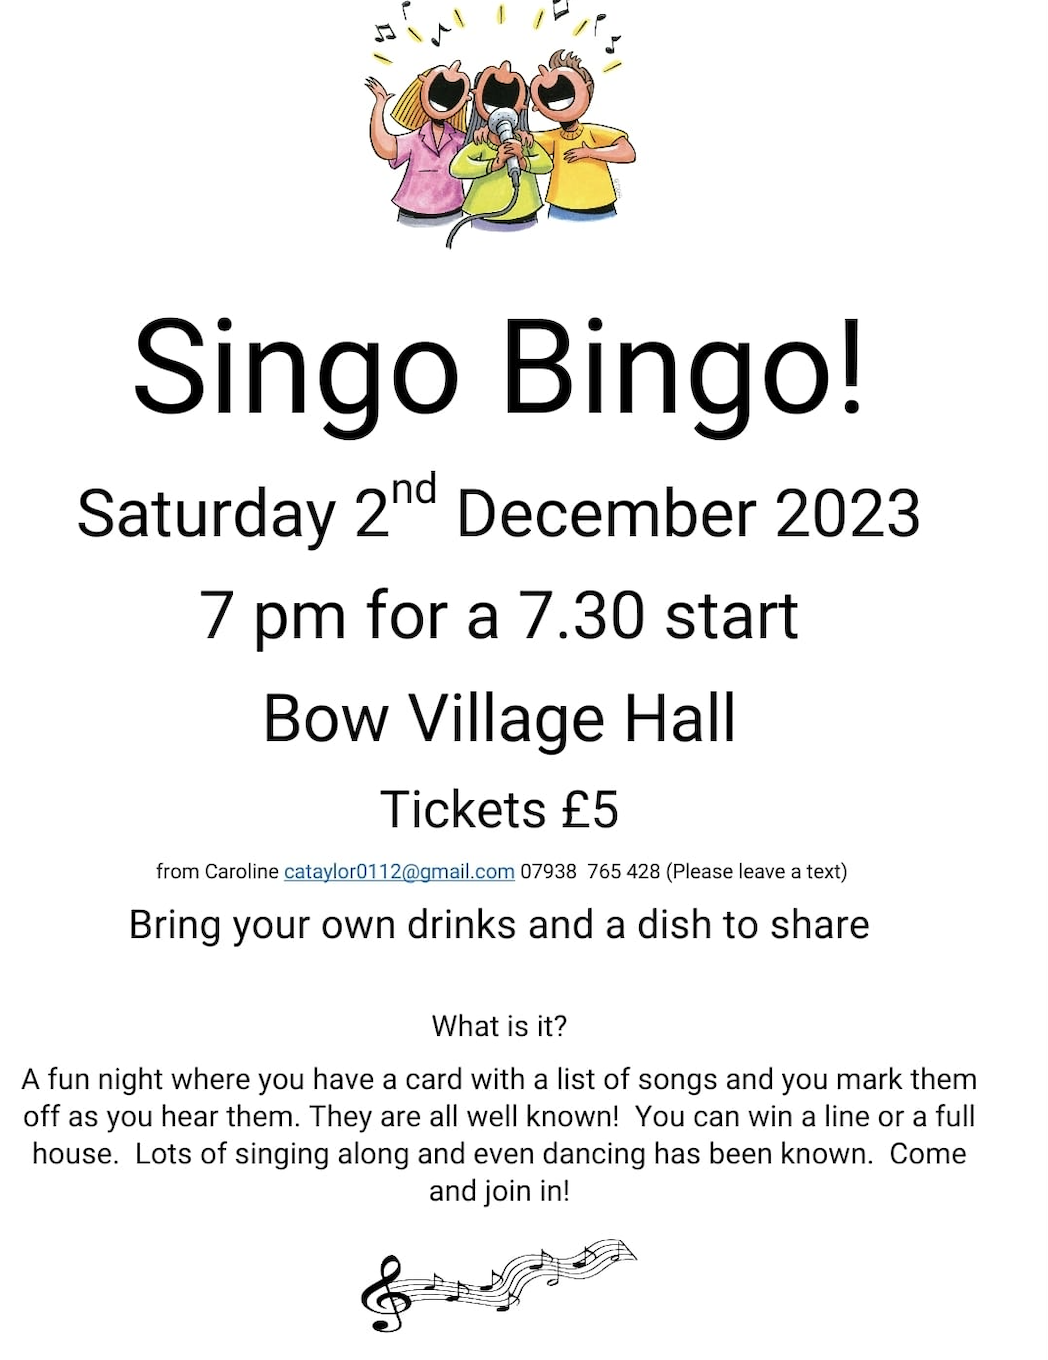 Bingo with a difference Saturday 2nd December